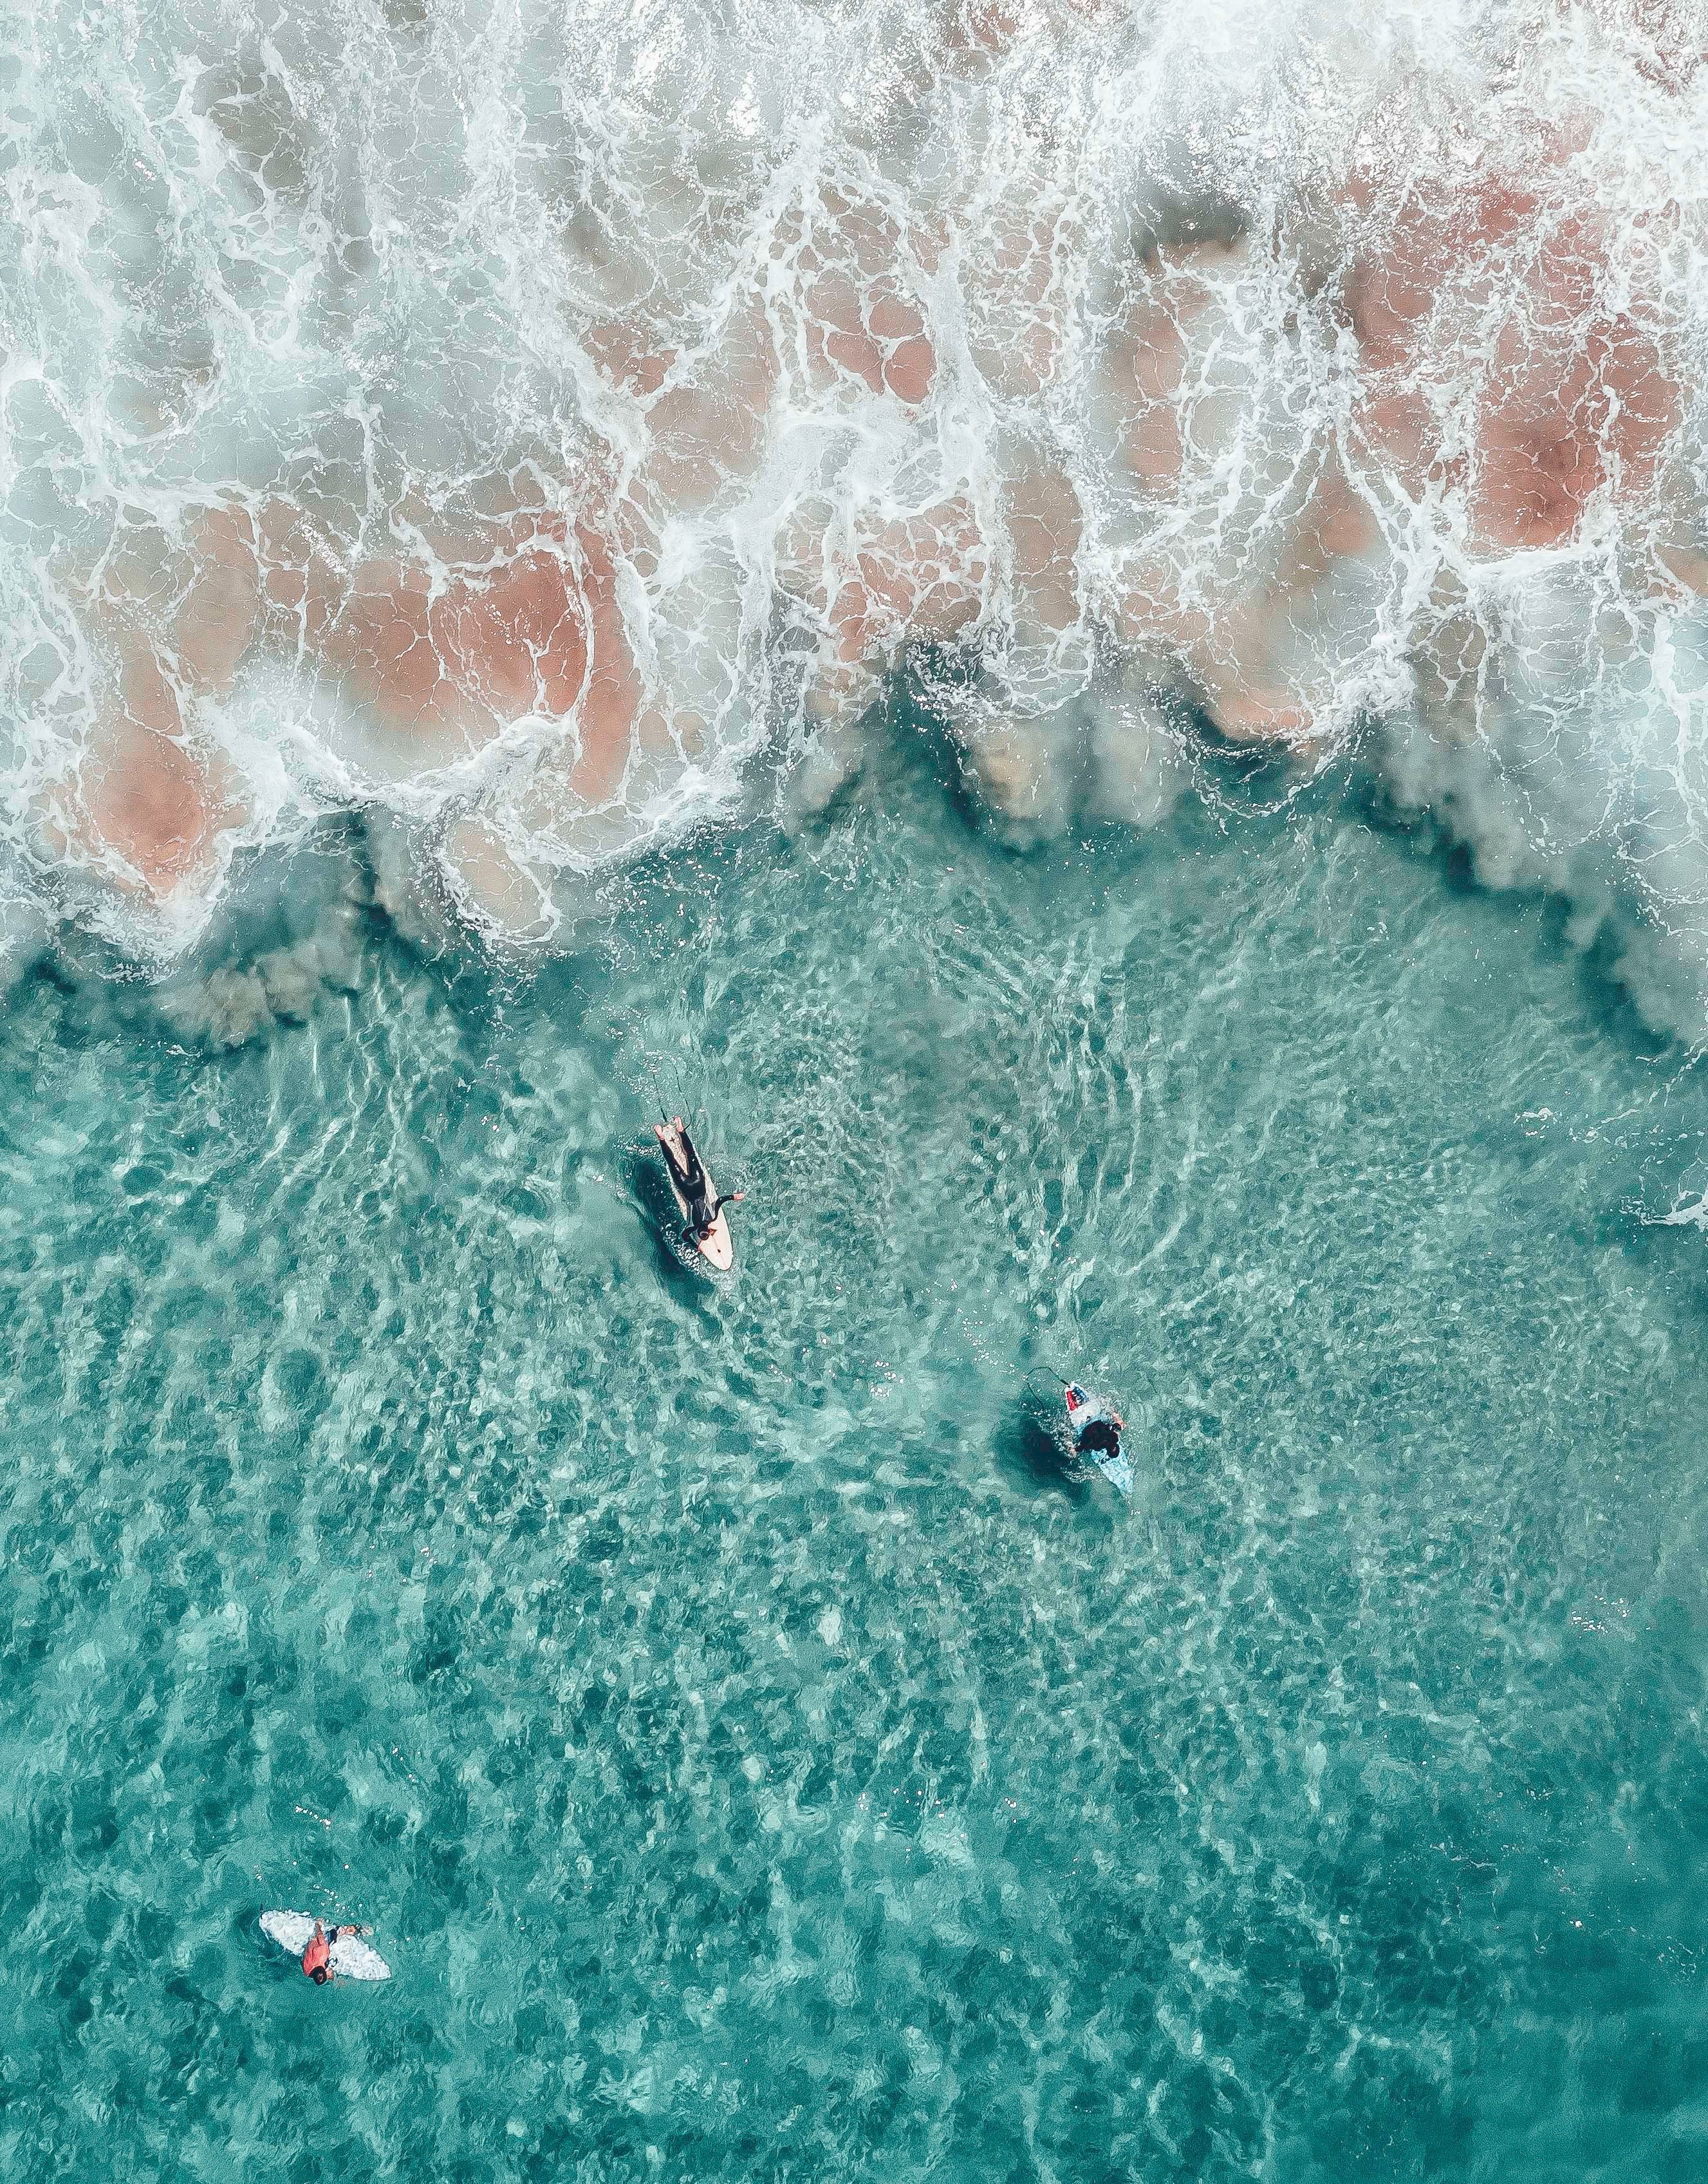 Aerial view of three surfers waiting for a wave - Beach, water, surf